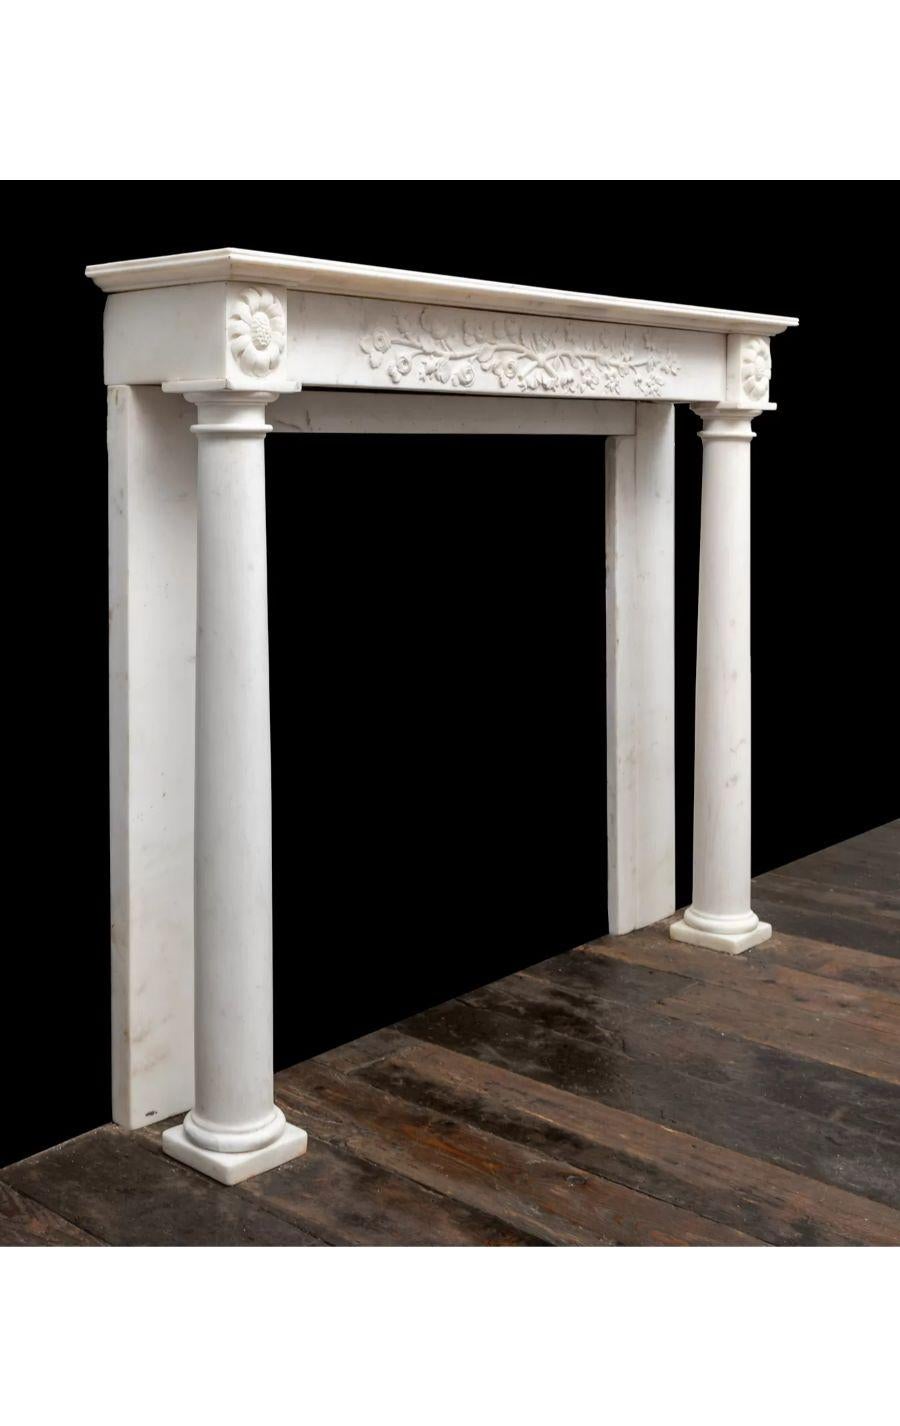 19th Century Italian Statuary Marble Regency Period Fireplace, circa 1820 In Good Condition For Sale In Tyrone, Northern Ireland